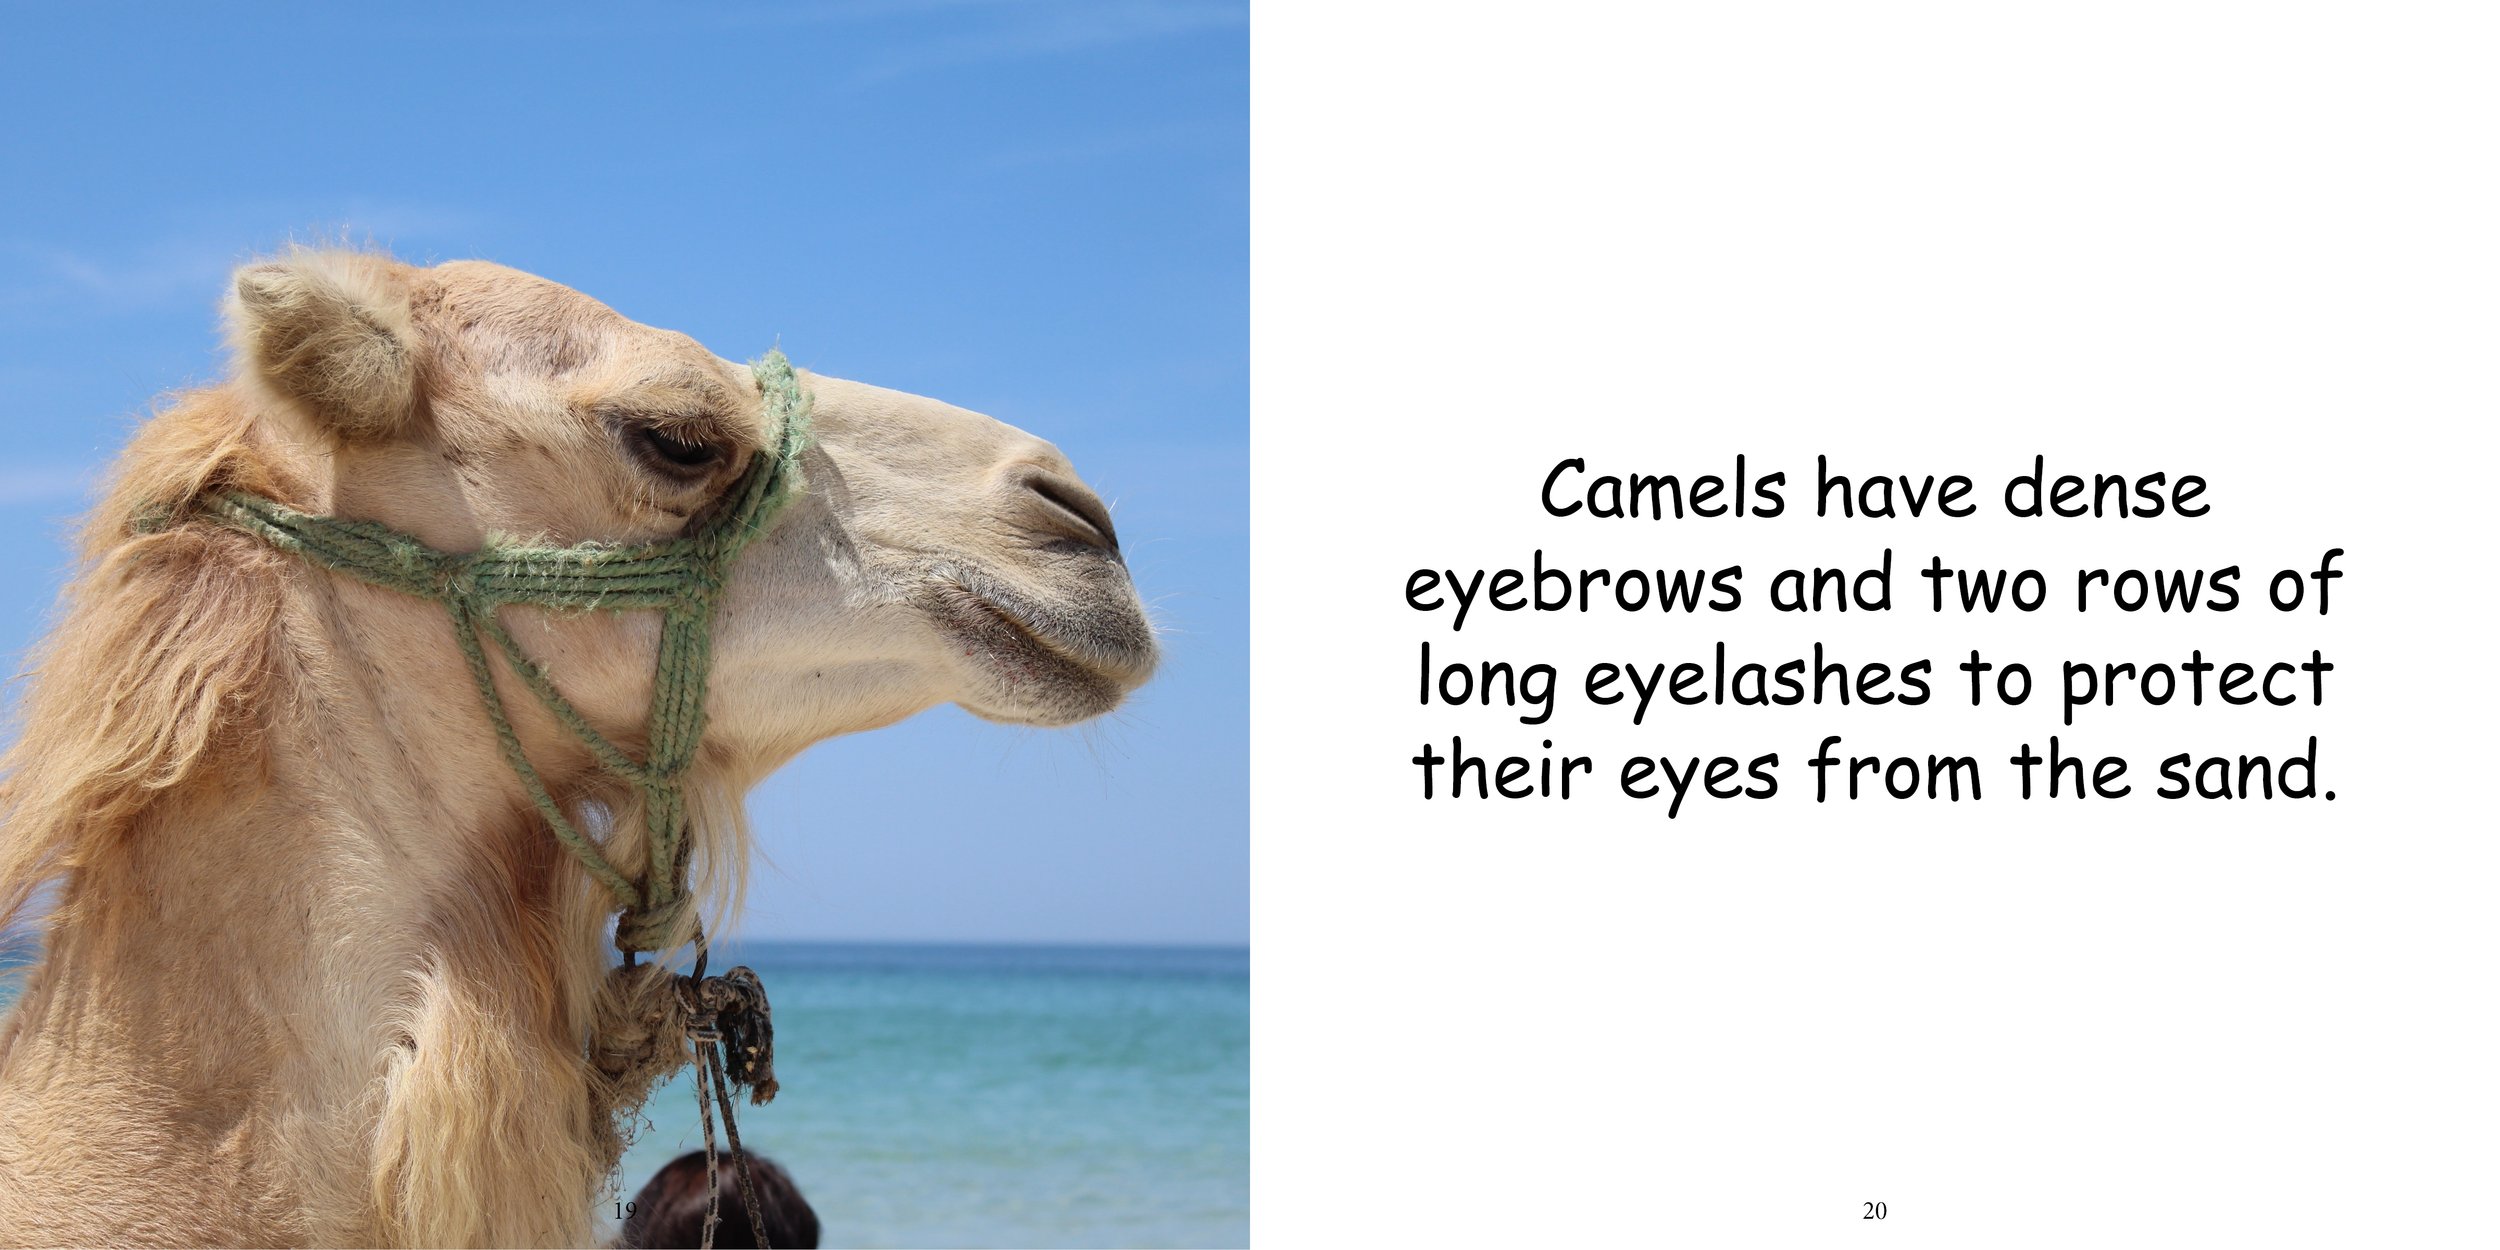 Everything about Camels14.jpg